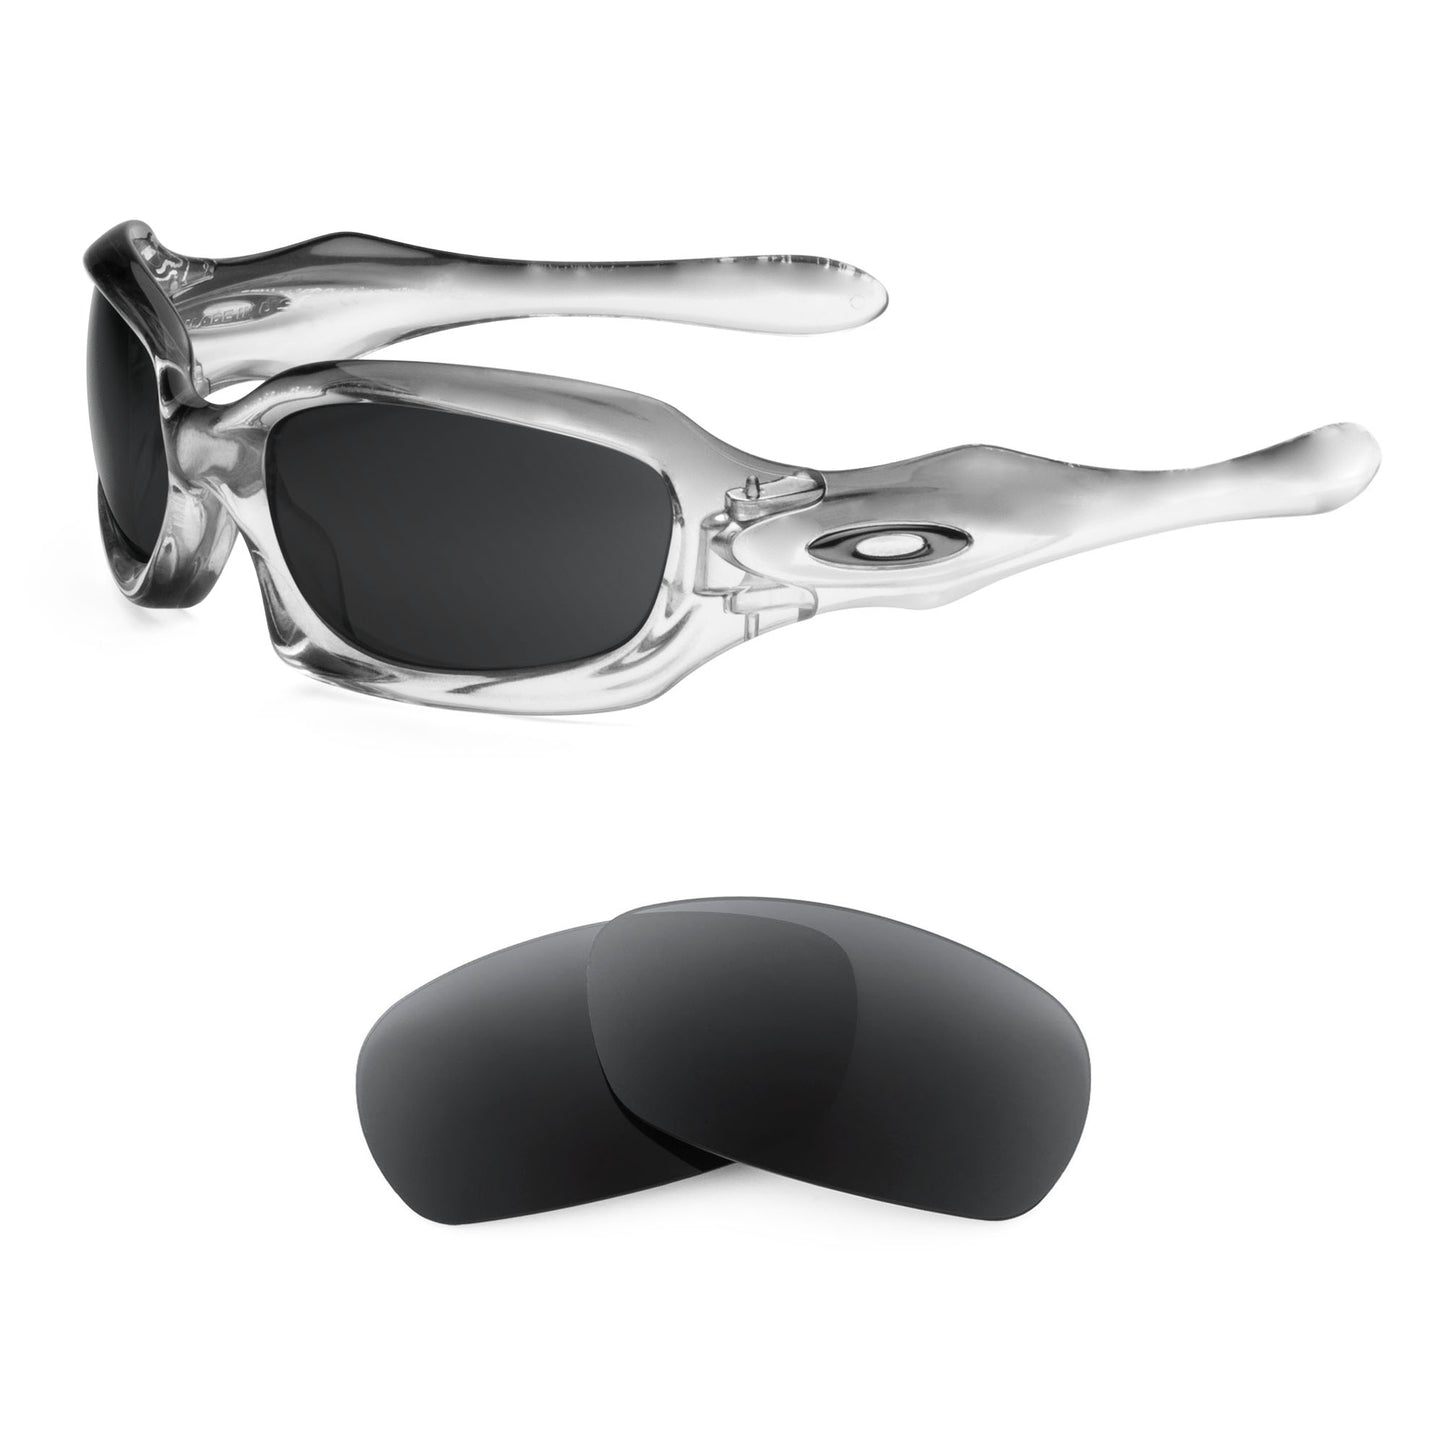 Oakley Monster Doggle sunglasses with replacement lenses